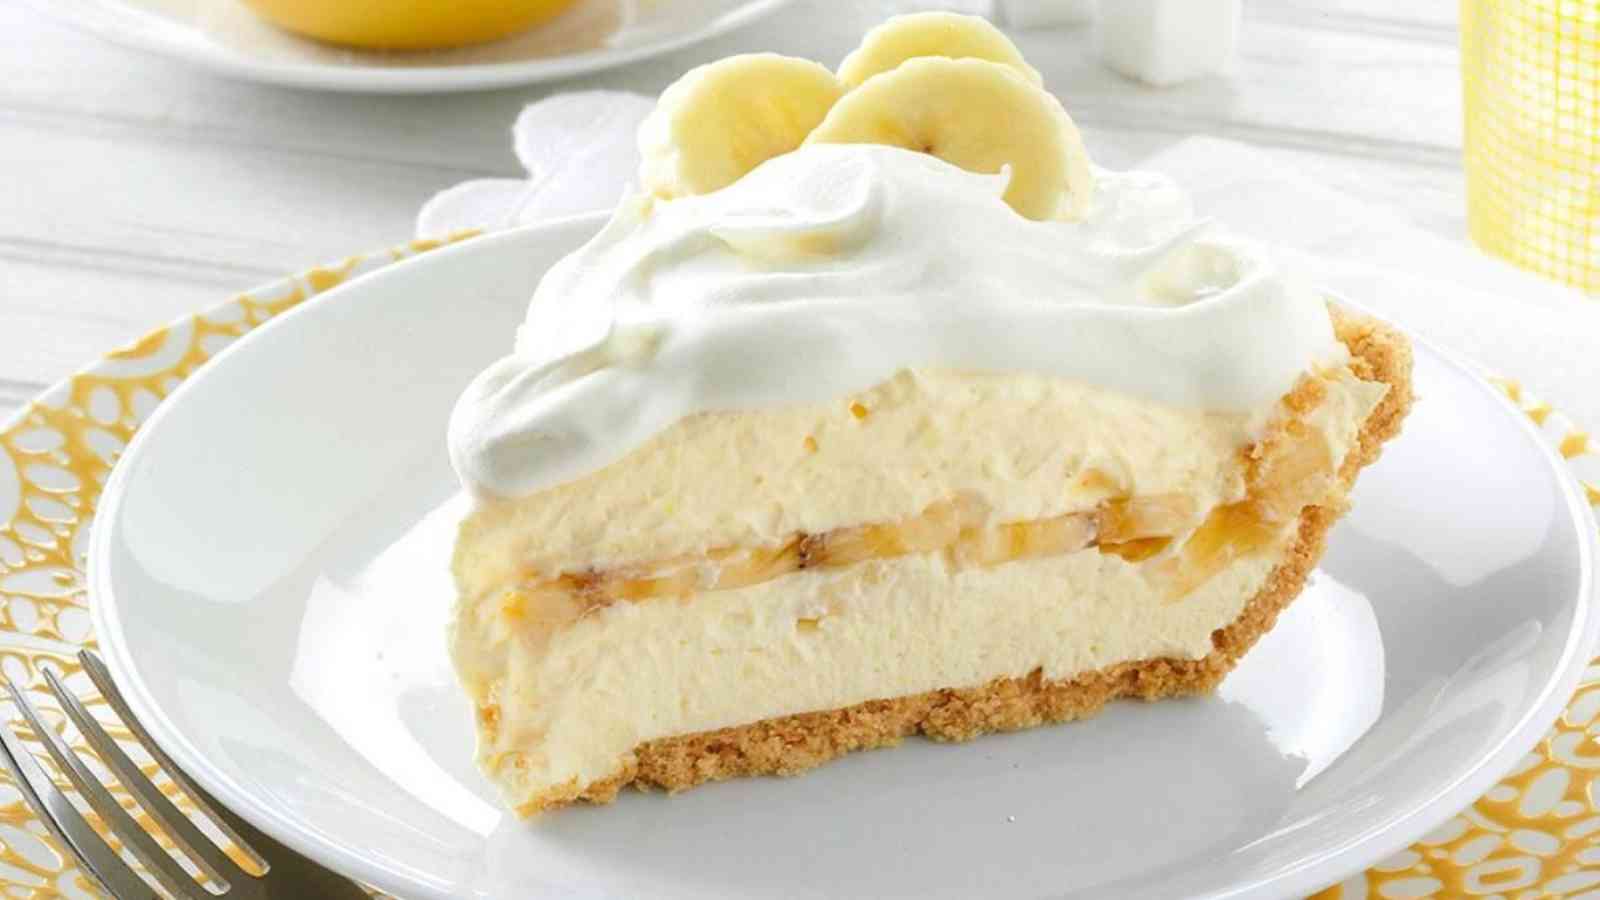 National Banana Cream Pie Day 2023: Date, History, Facts